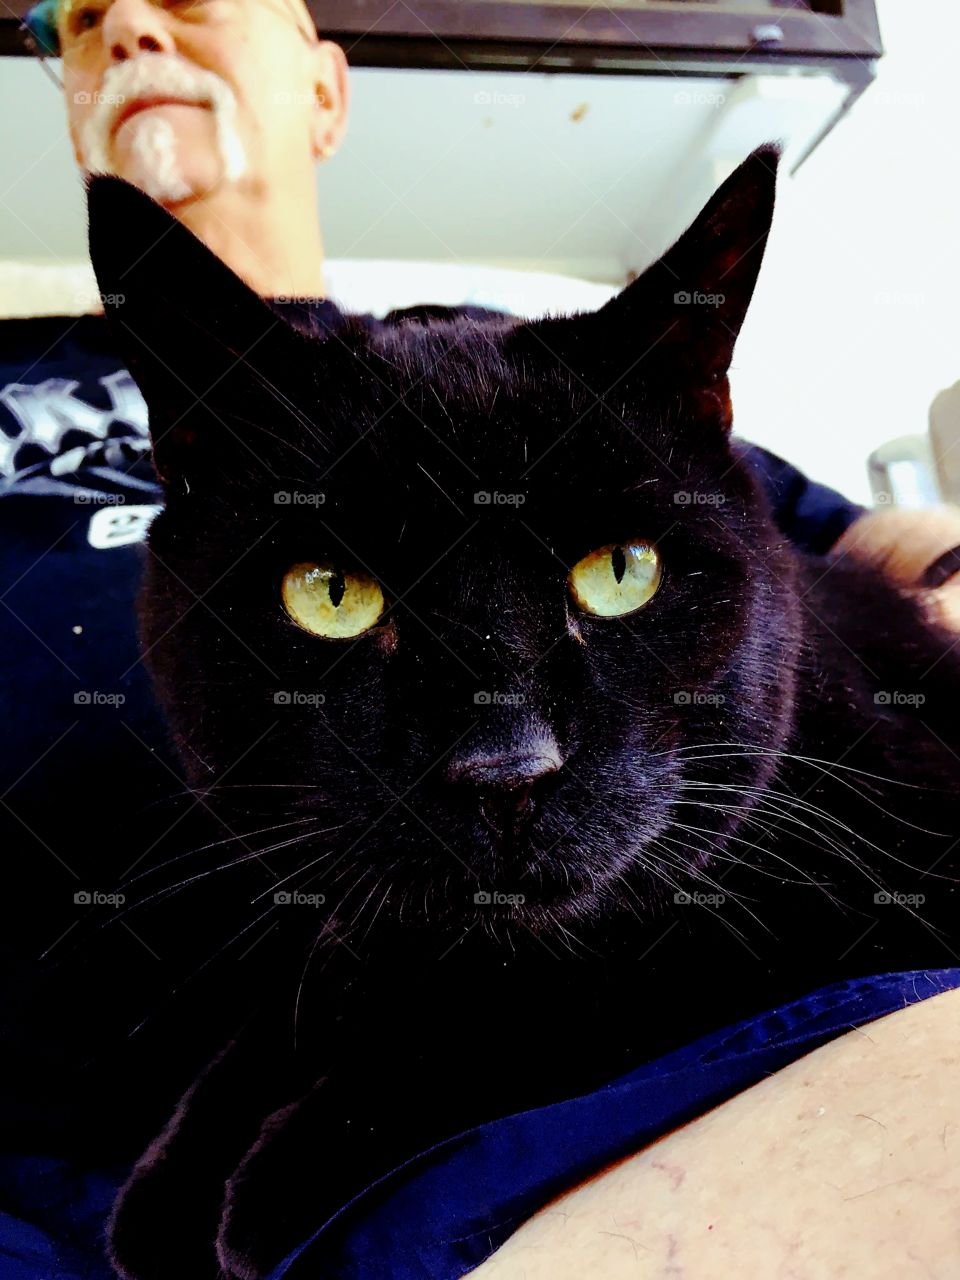 Black Cat, green eyes, on her masters lap.